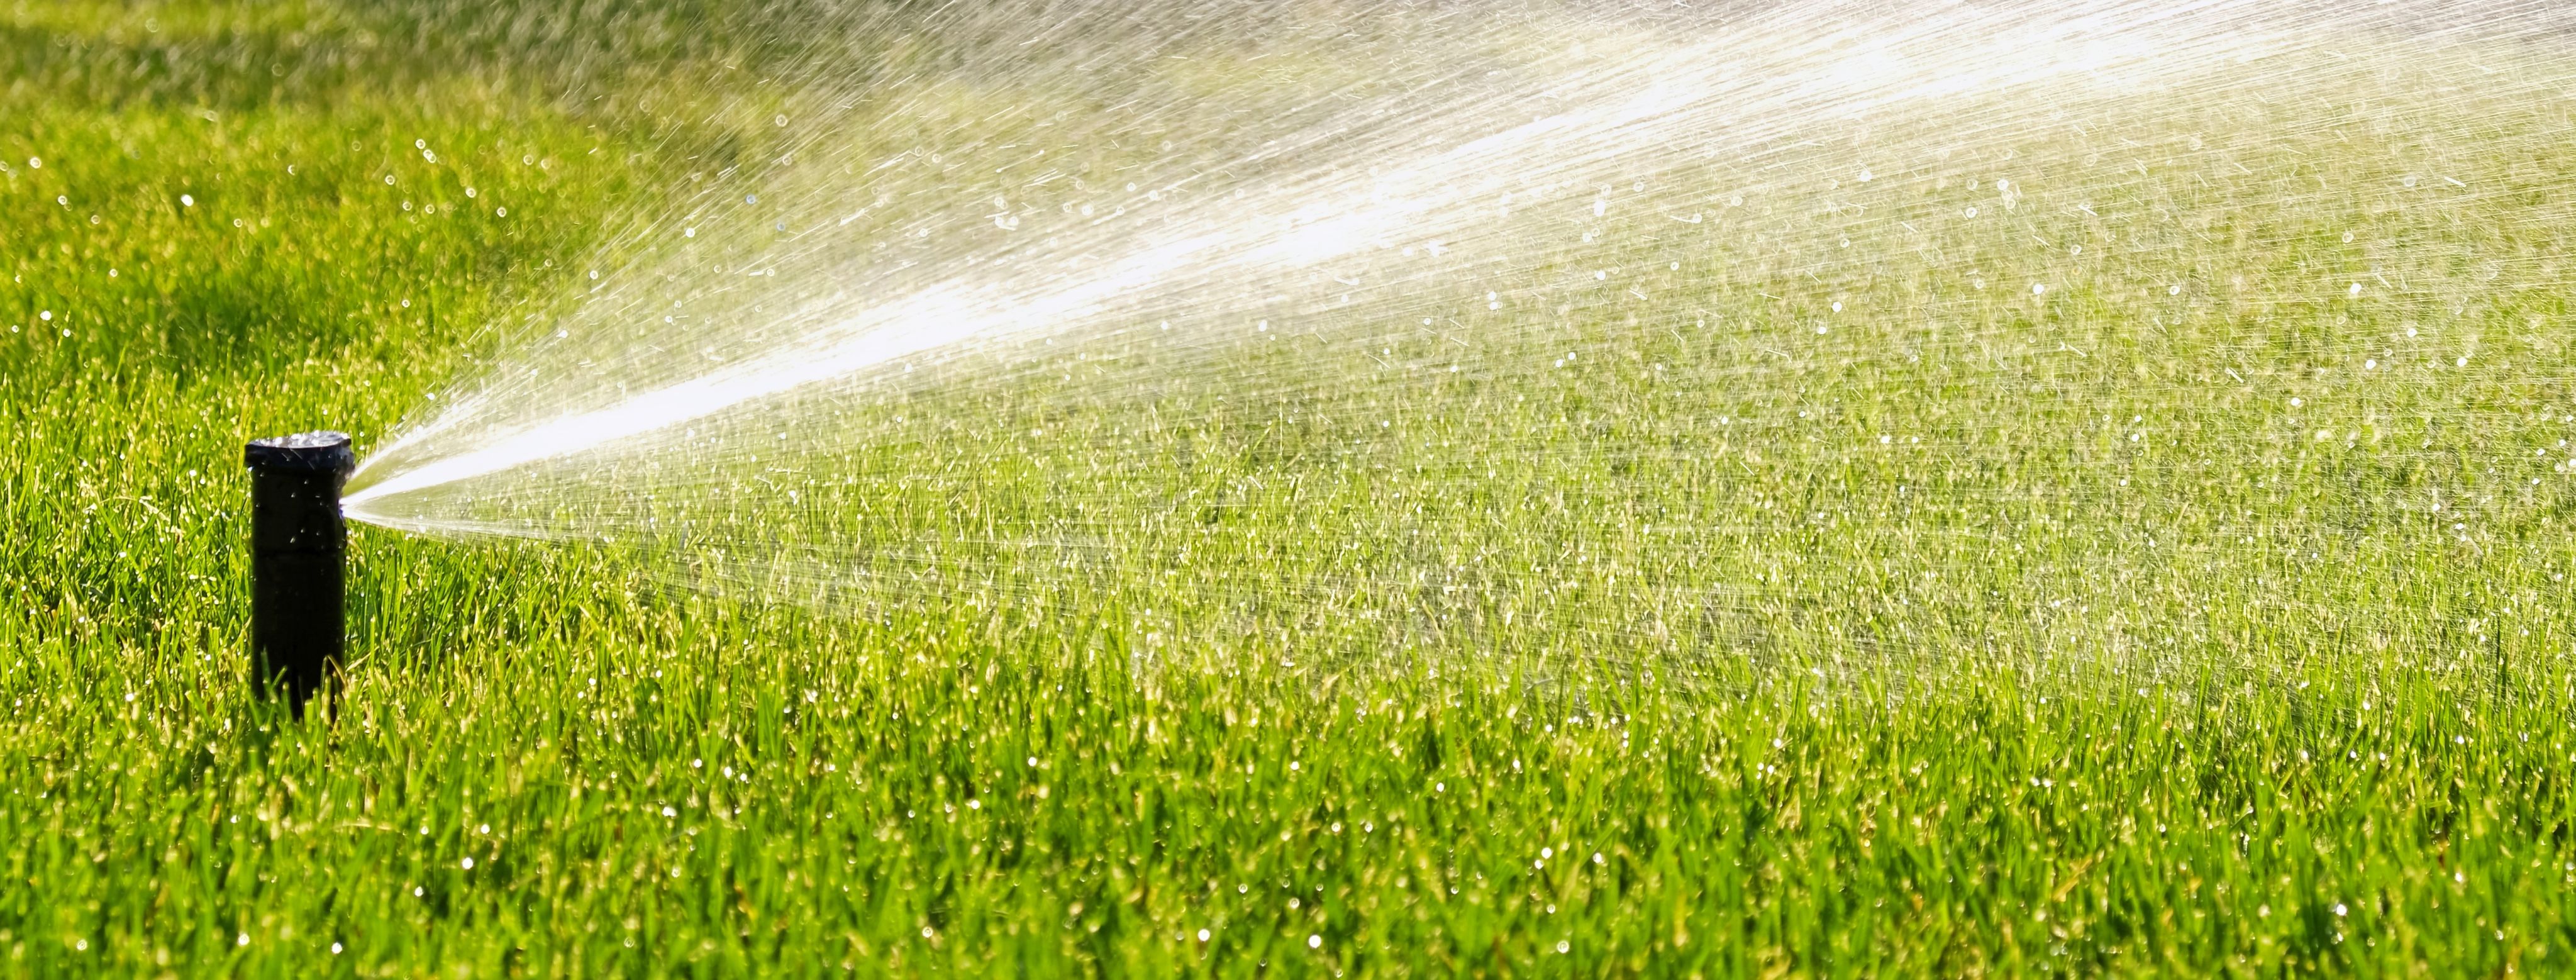 An automatic lawn sprinkler is spraying water out over green grass.